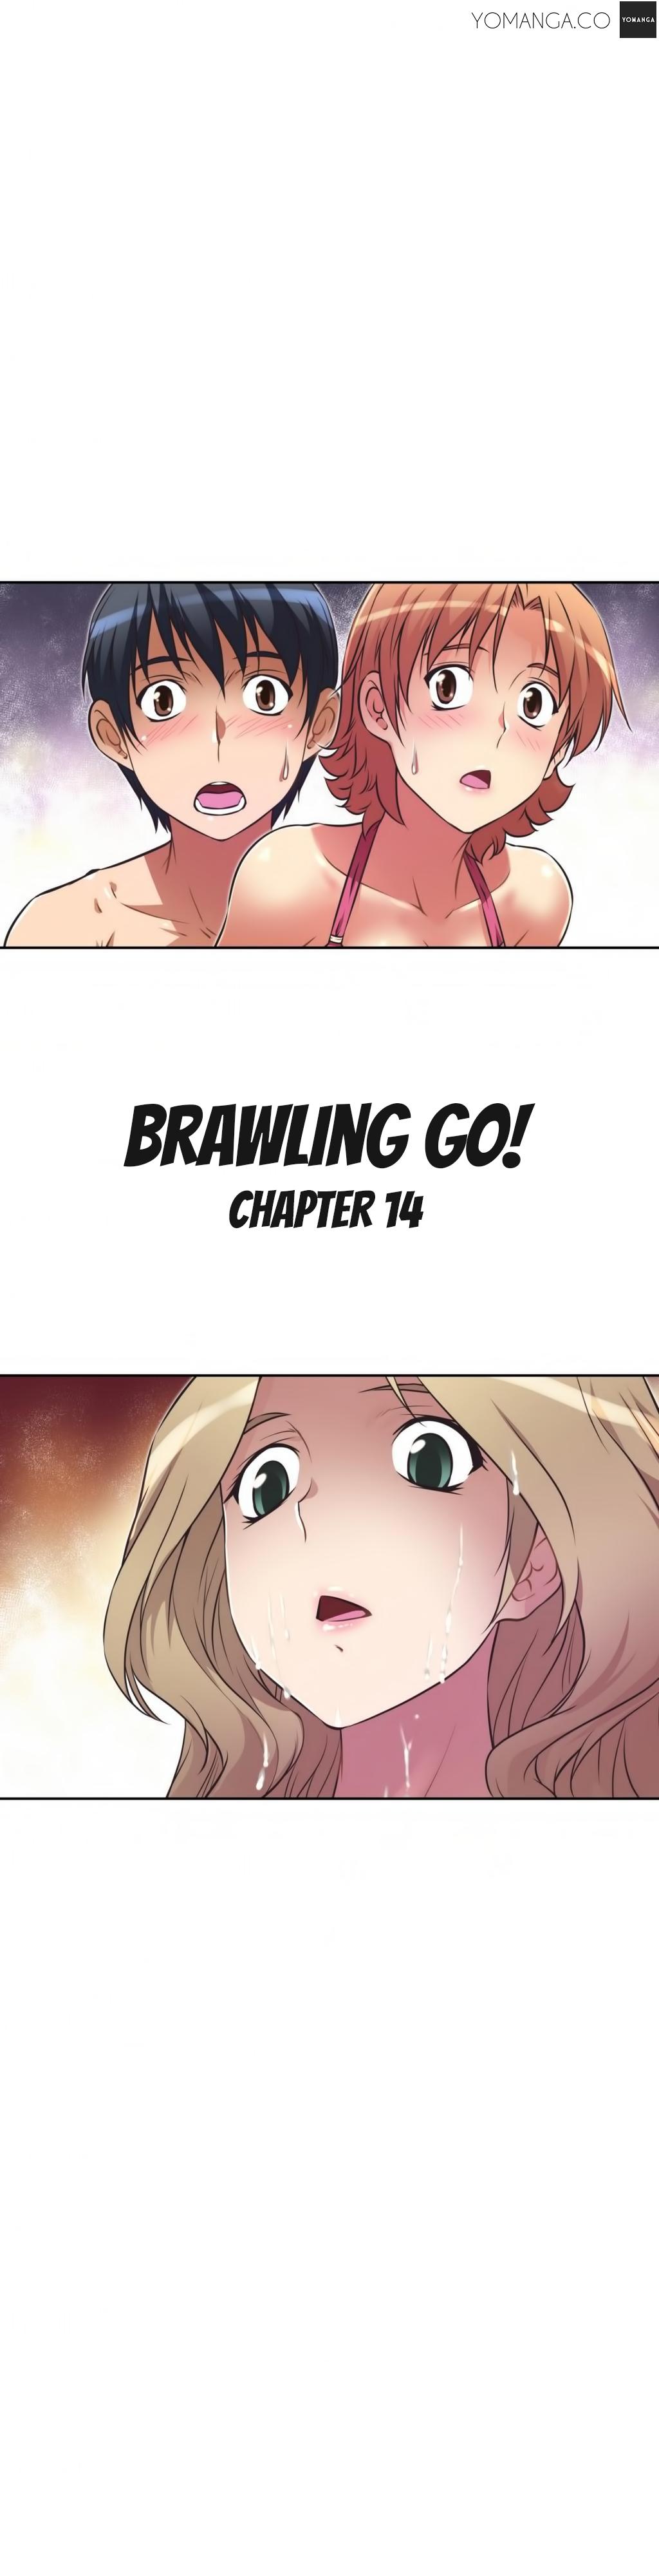 Brawling Go 0-18 Chapters 468